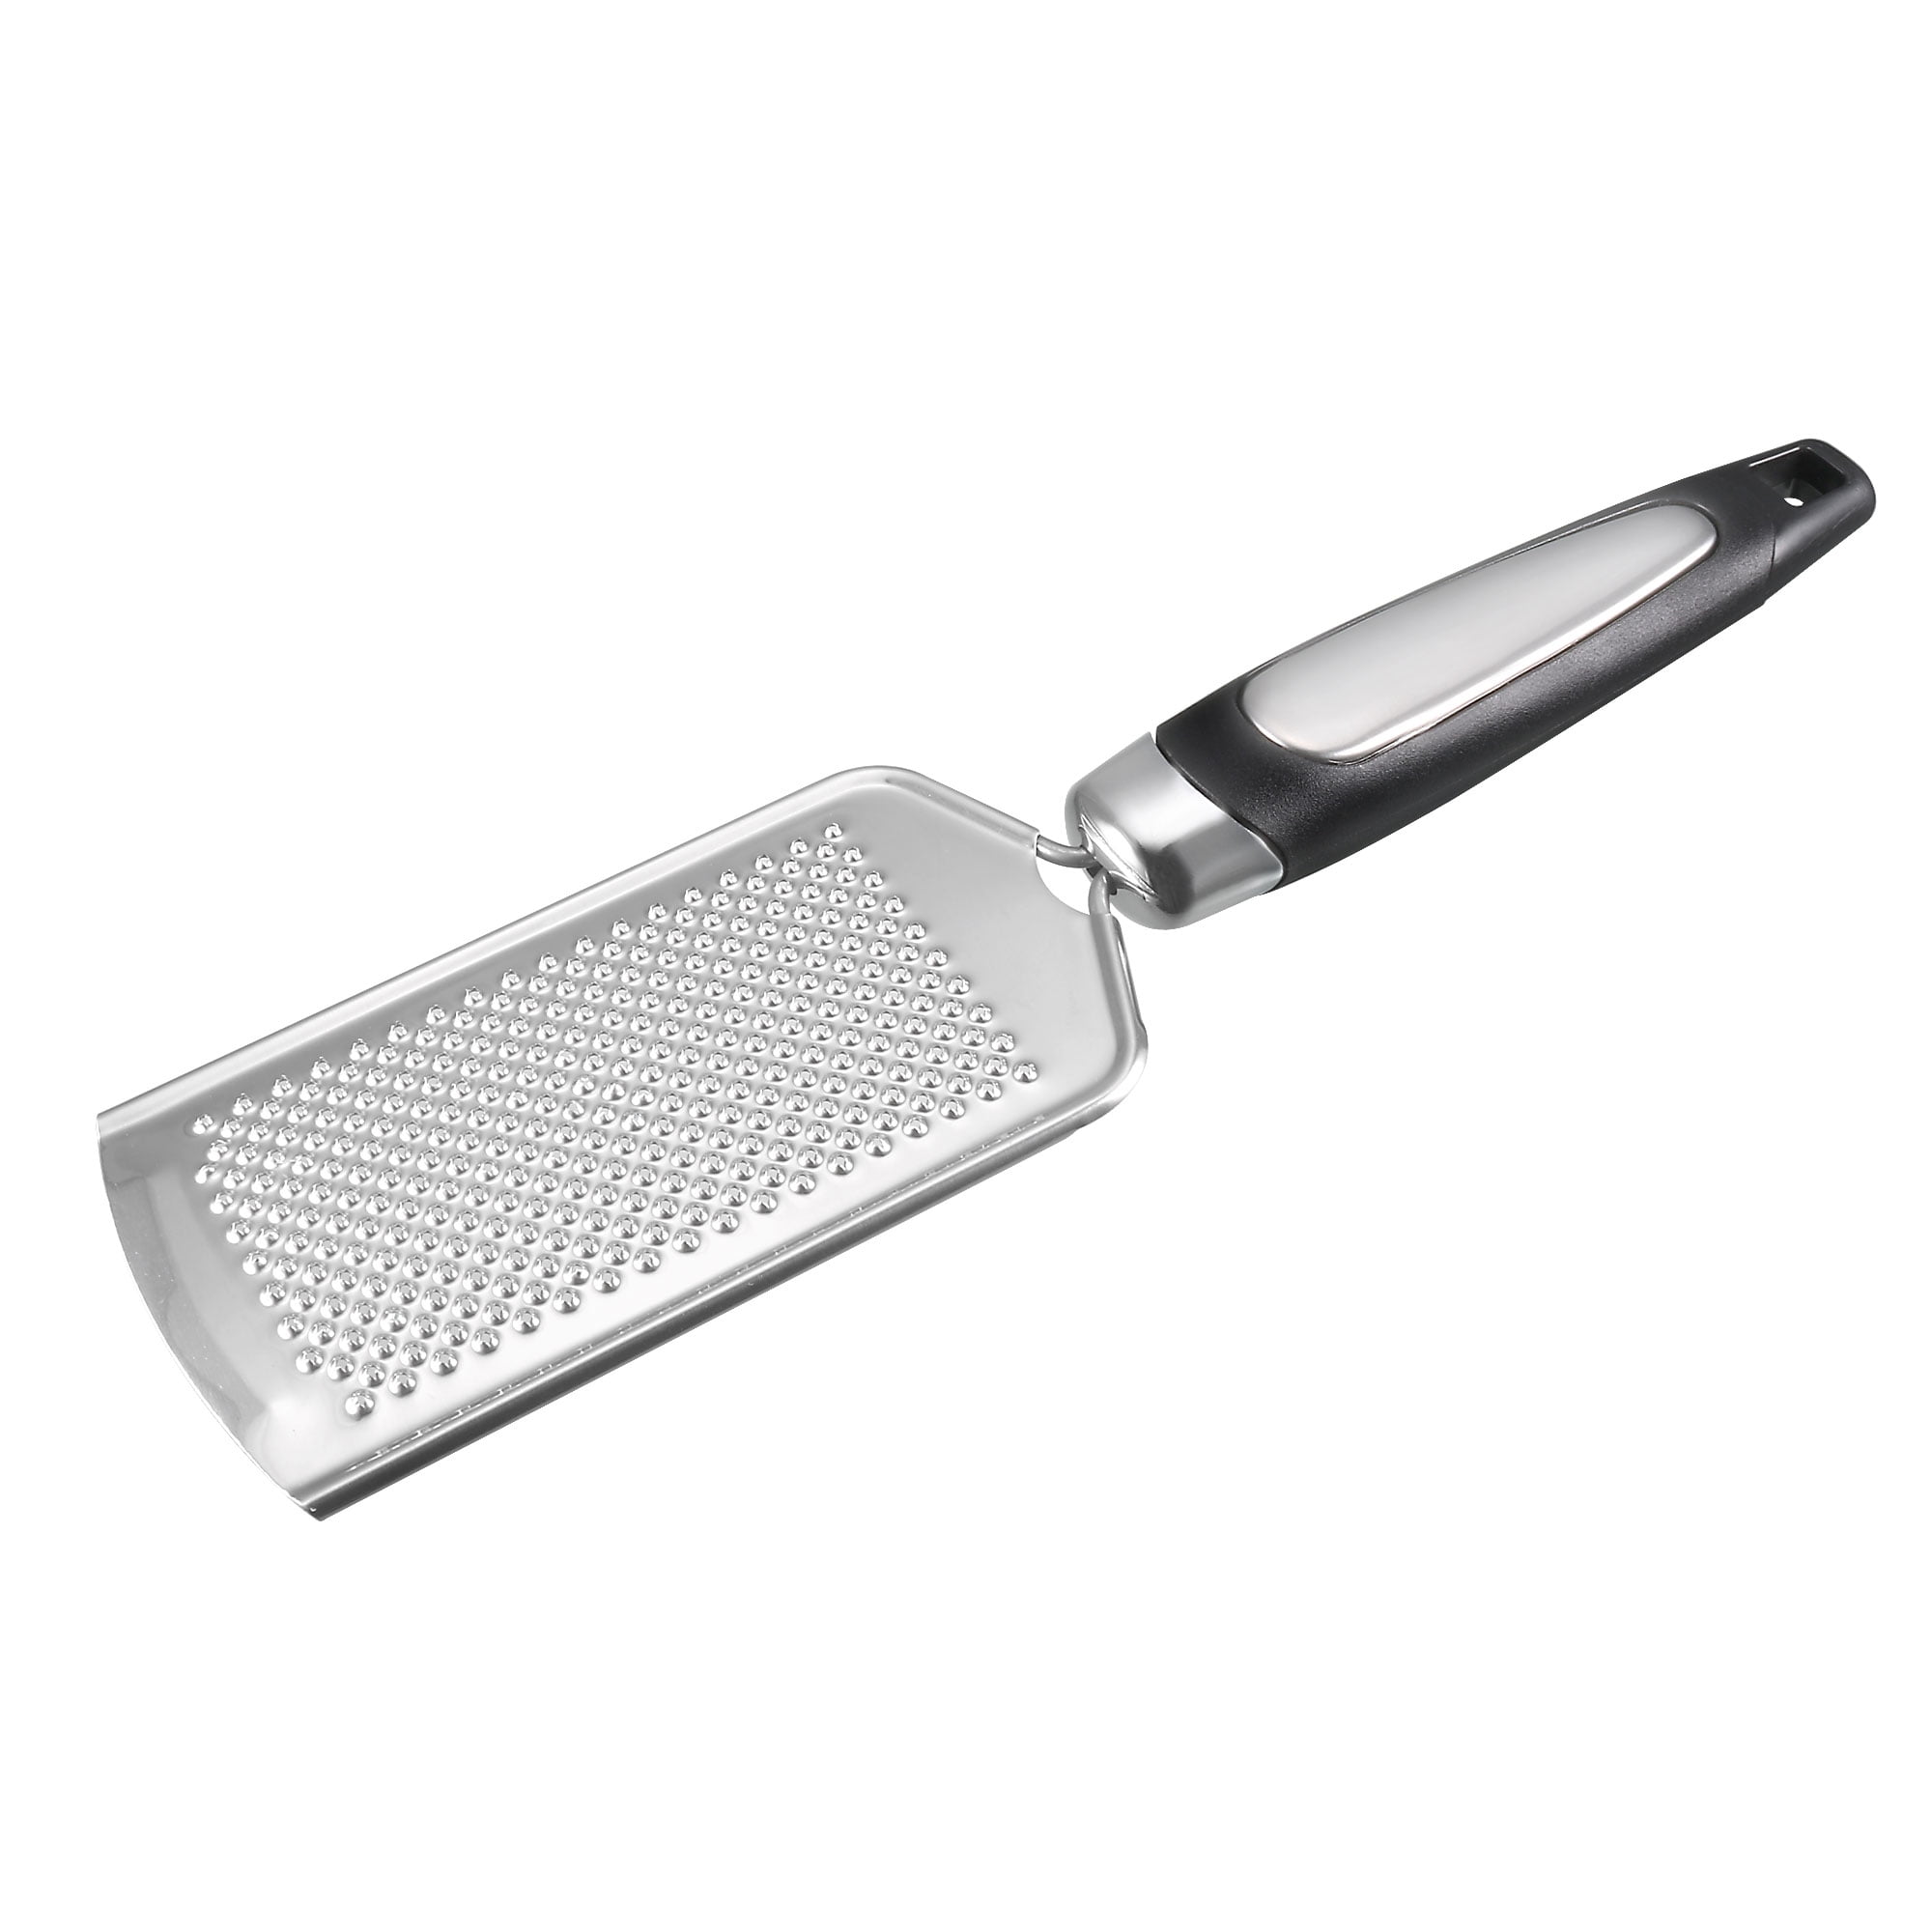 CHUANK Stainless Steel Handheld Cheese Grater – Comfort Non-Slip